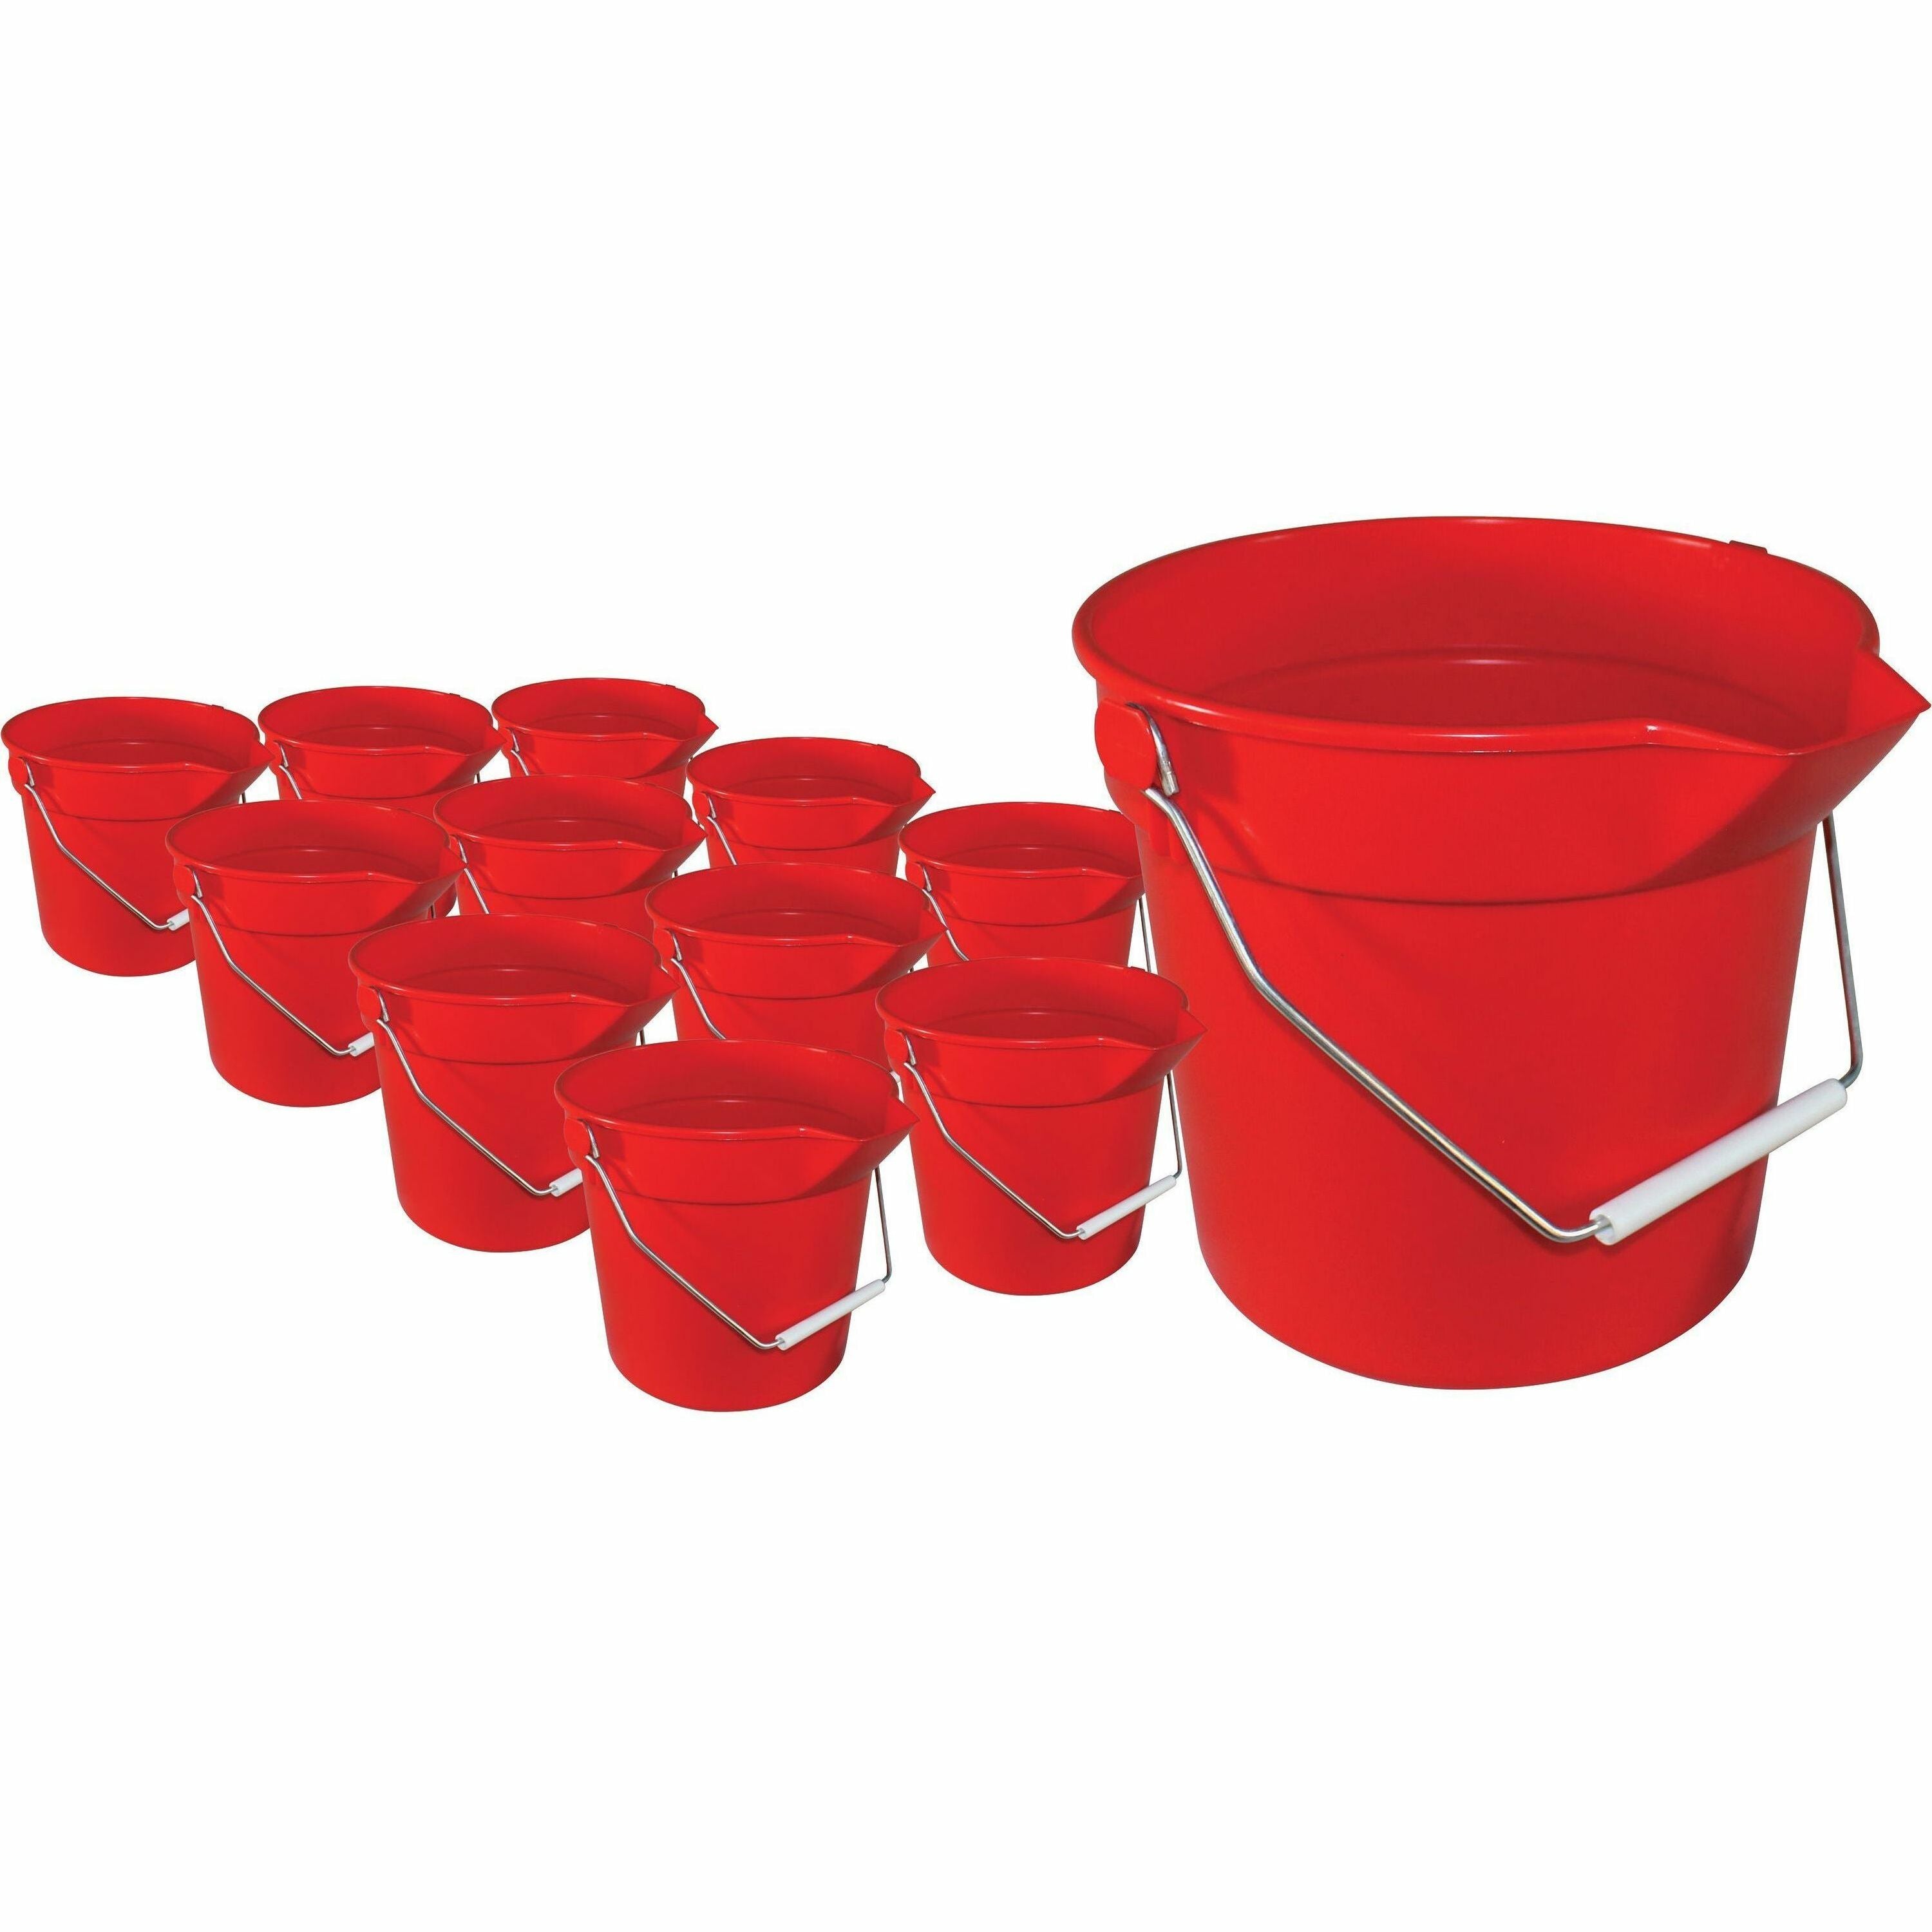 impact-10-quart-deluxe-bucket-250-gal-rugged-handle-spill-resistant-embossed-acid-resistant-alkali-resistant-chemical-resistant-heavy-duty-rugged-102-x-111-polypropylene-red-12-carton_imp5510rct - 1